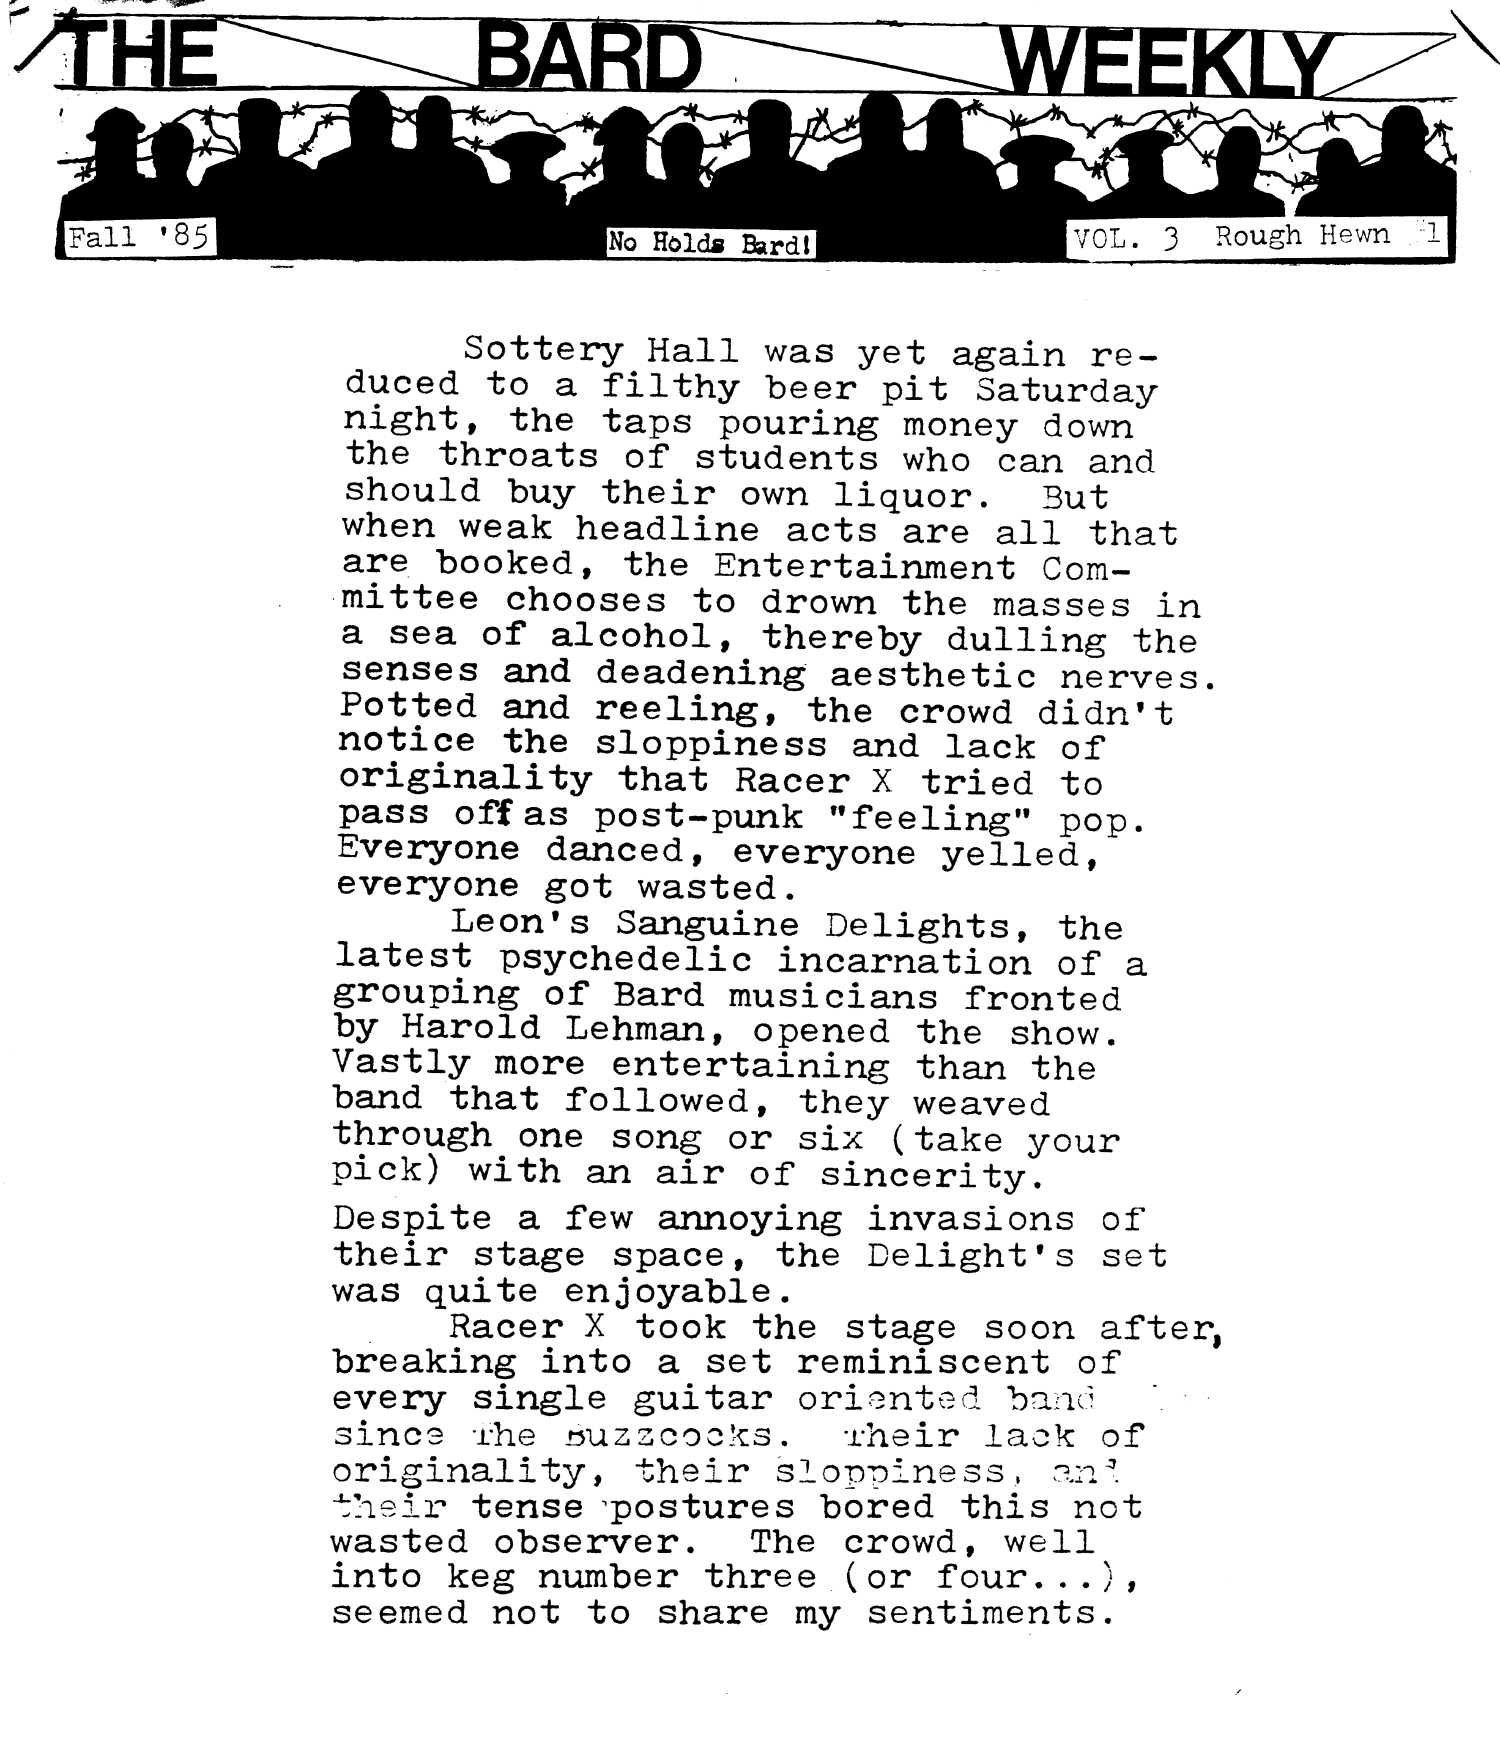 L.S.D. review in Bard Weekly Fall '85